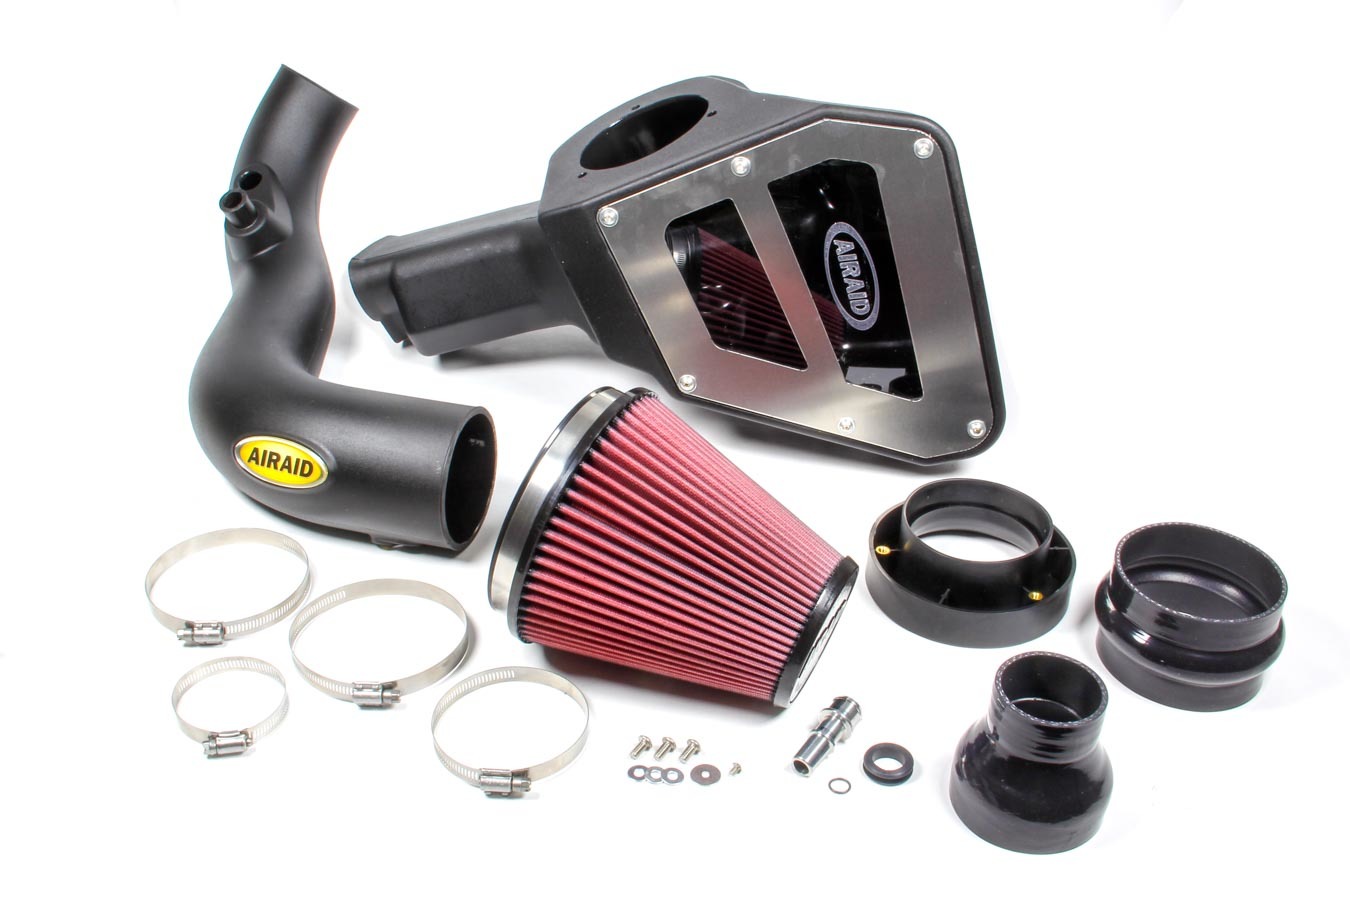 AIRAID Air Induction System, MXP, Reusable Oiled Filter, Ford EcoBoost 4-Cylinder, Ford Mustang 2015, Kit